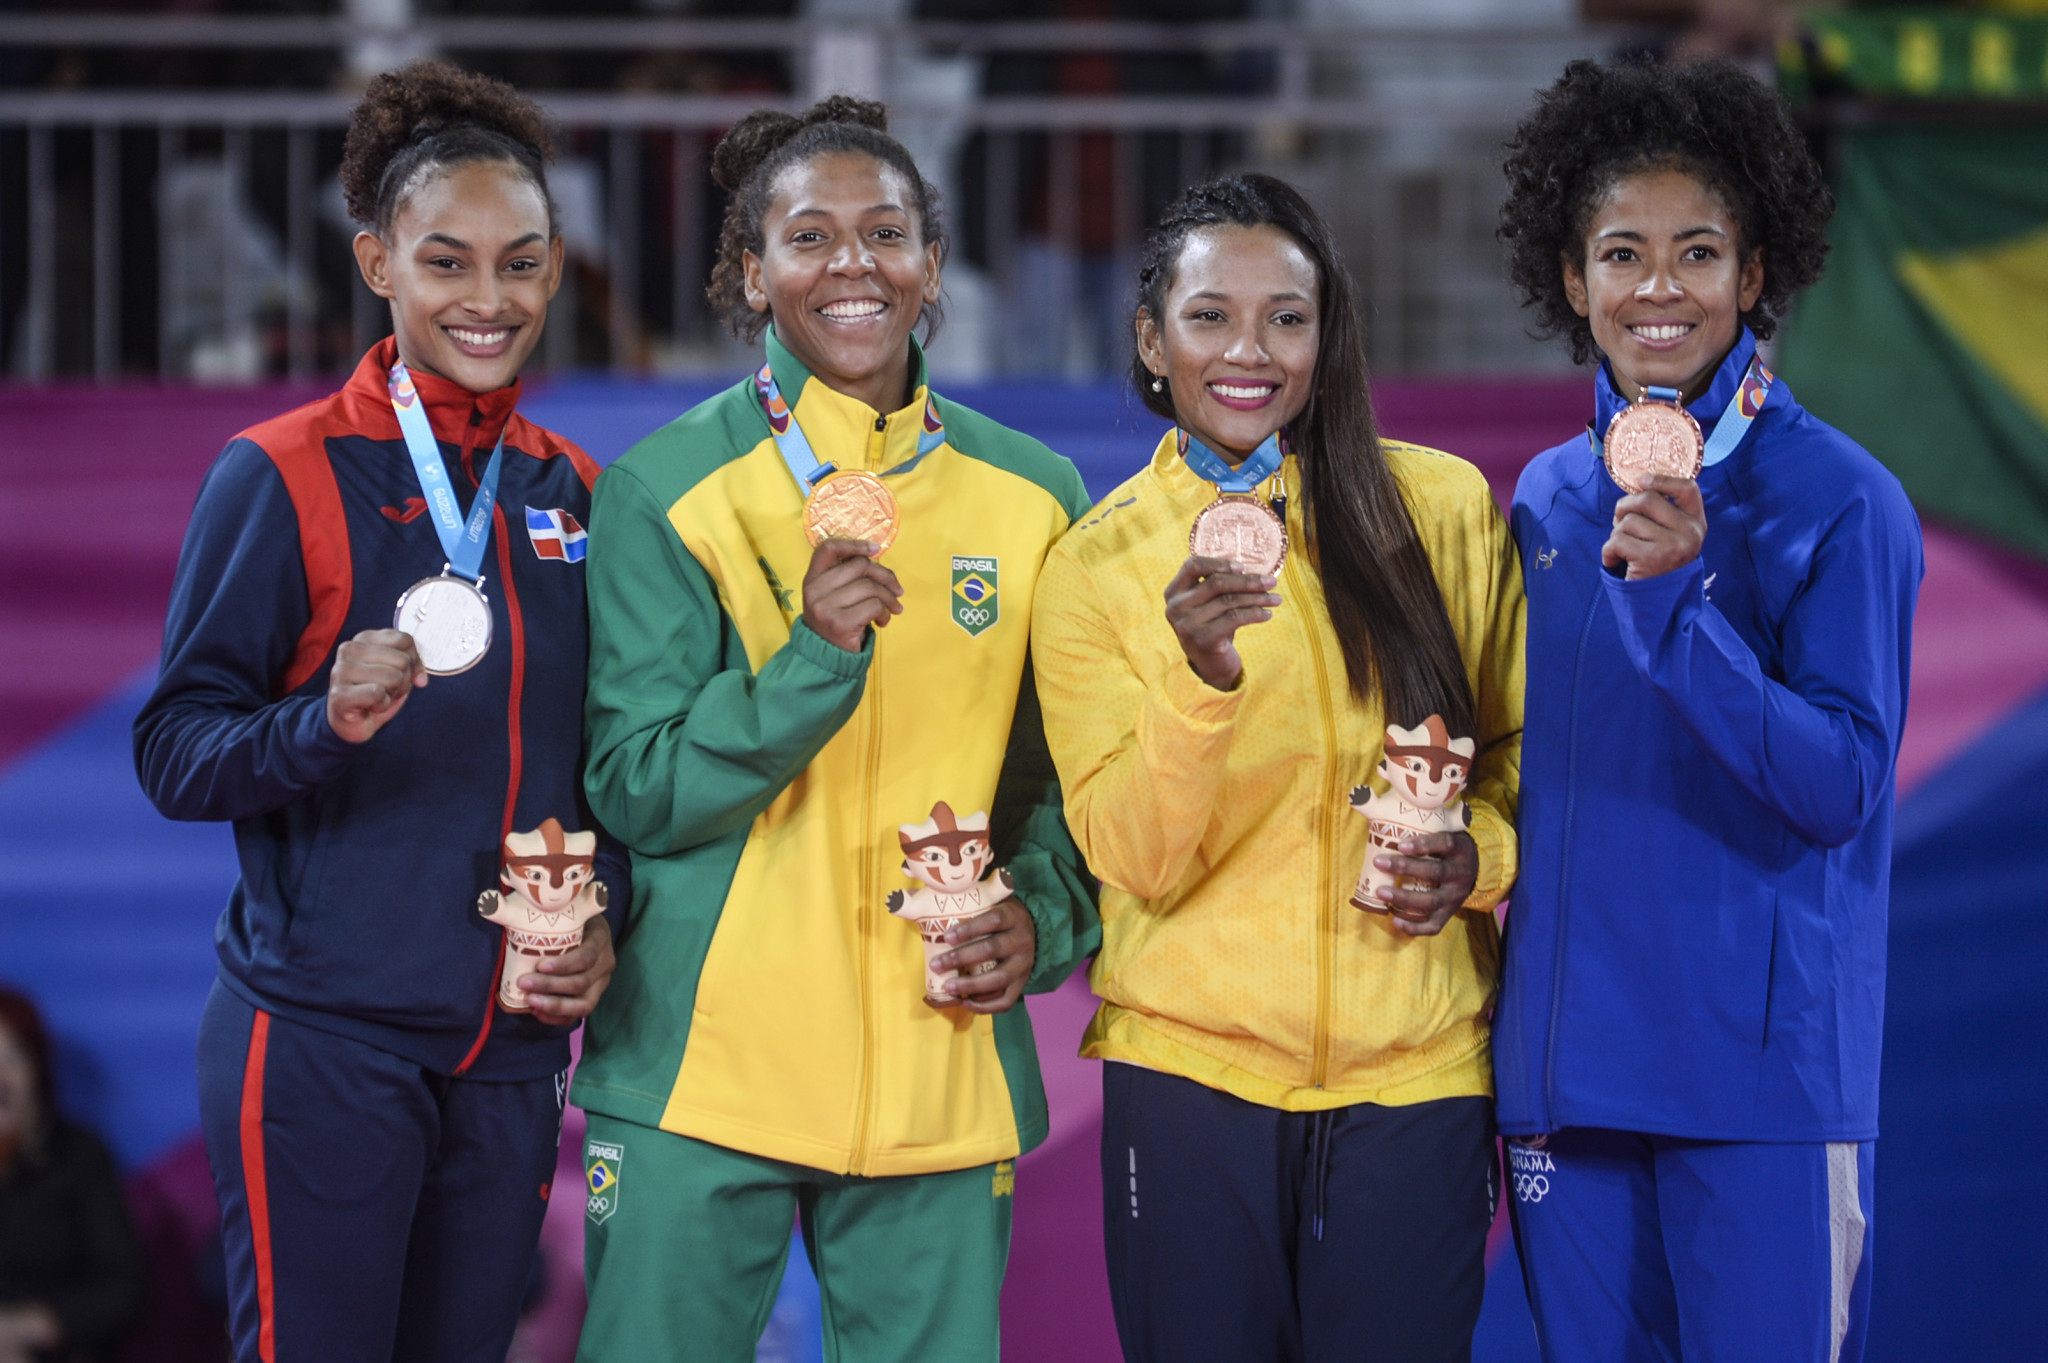 Silva, centre left, won gold in the 57 kilogram category at Lima 2019 Pan American Games ©Getty Images